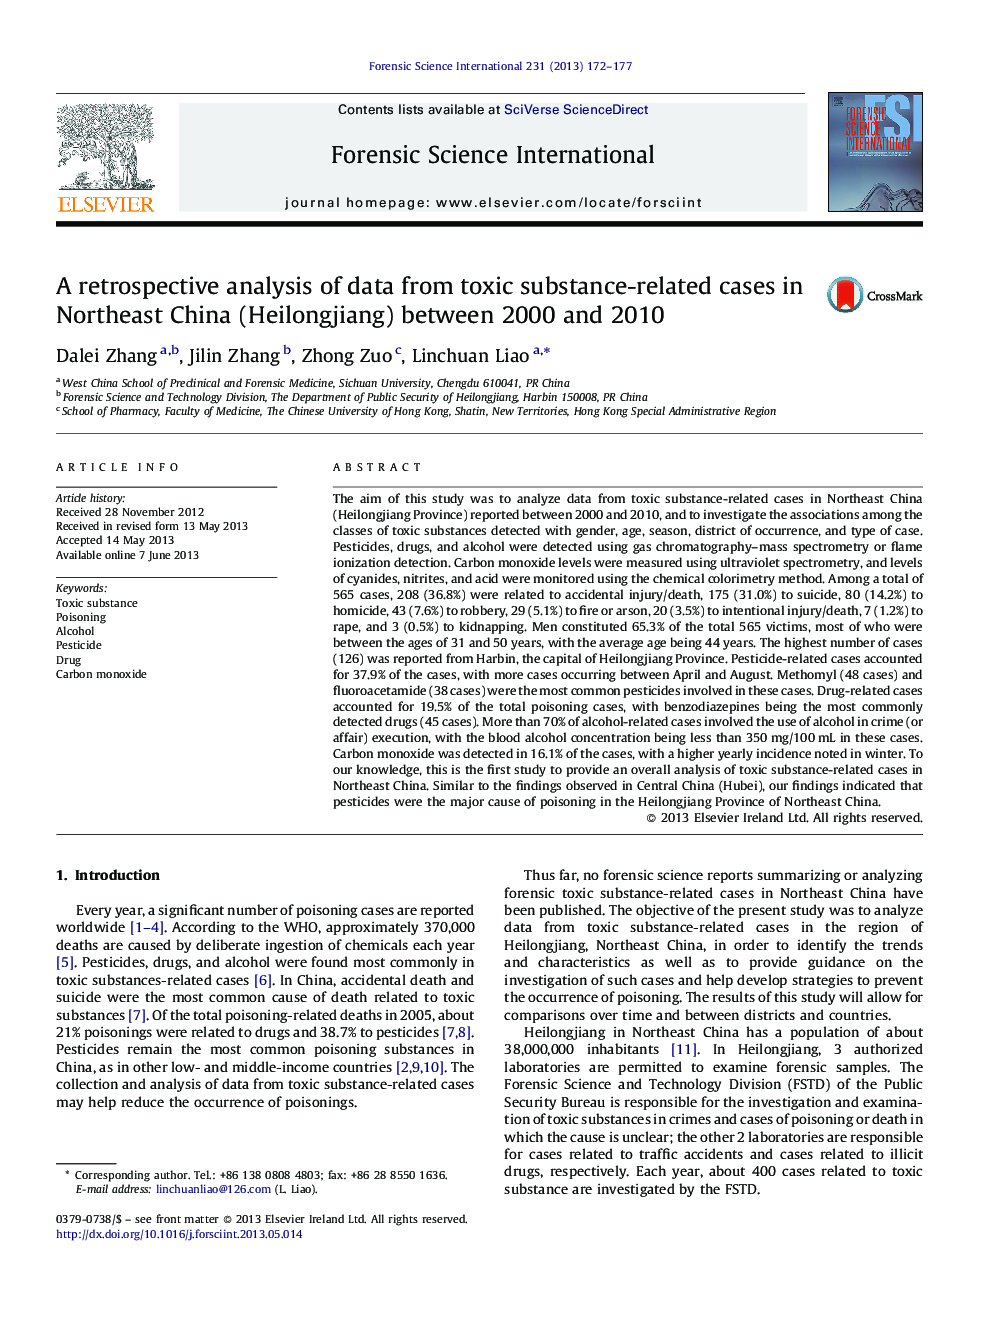 A retrospective analysis of data from toxic substance-related cases in Northeast China (Heilongjiang) between 2000 and 2010